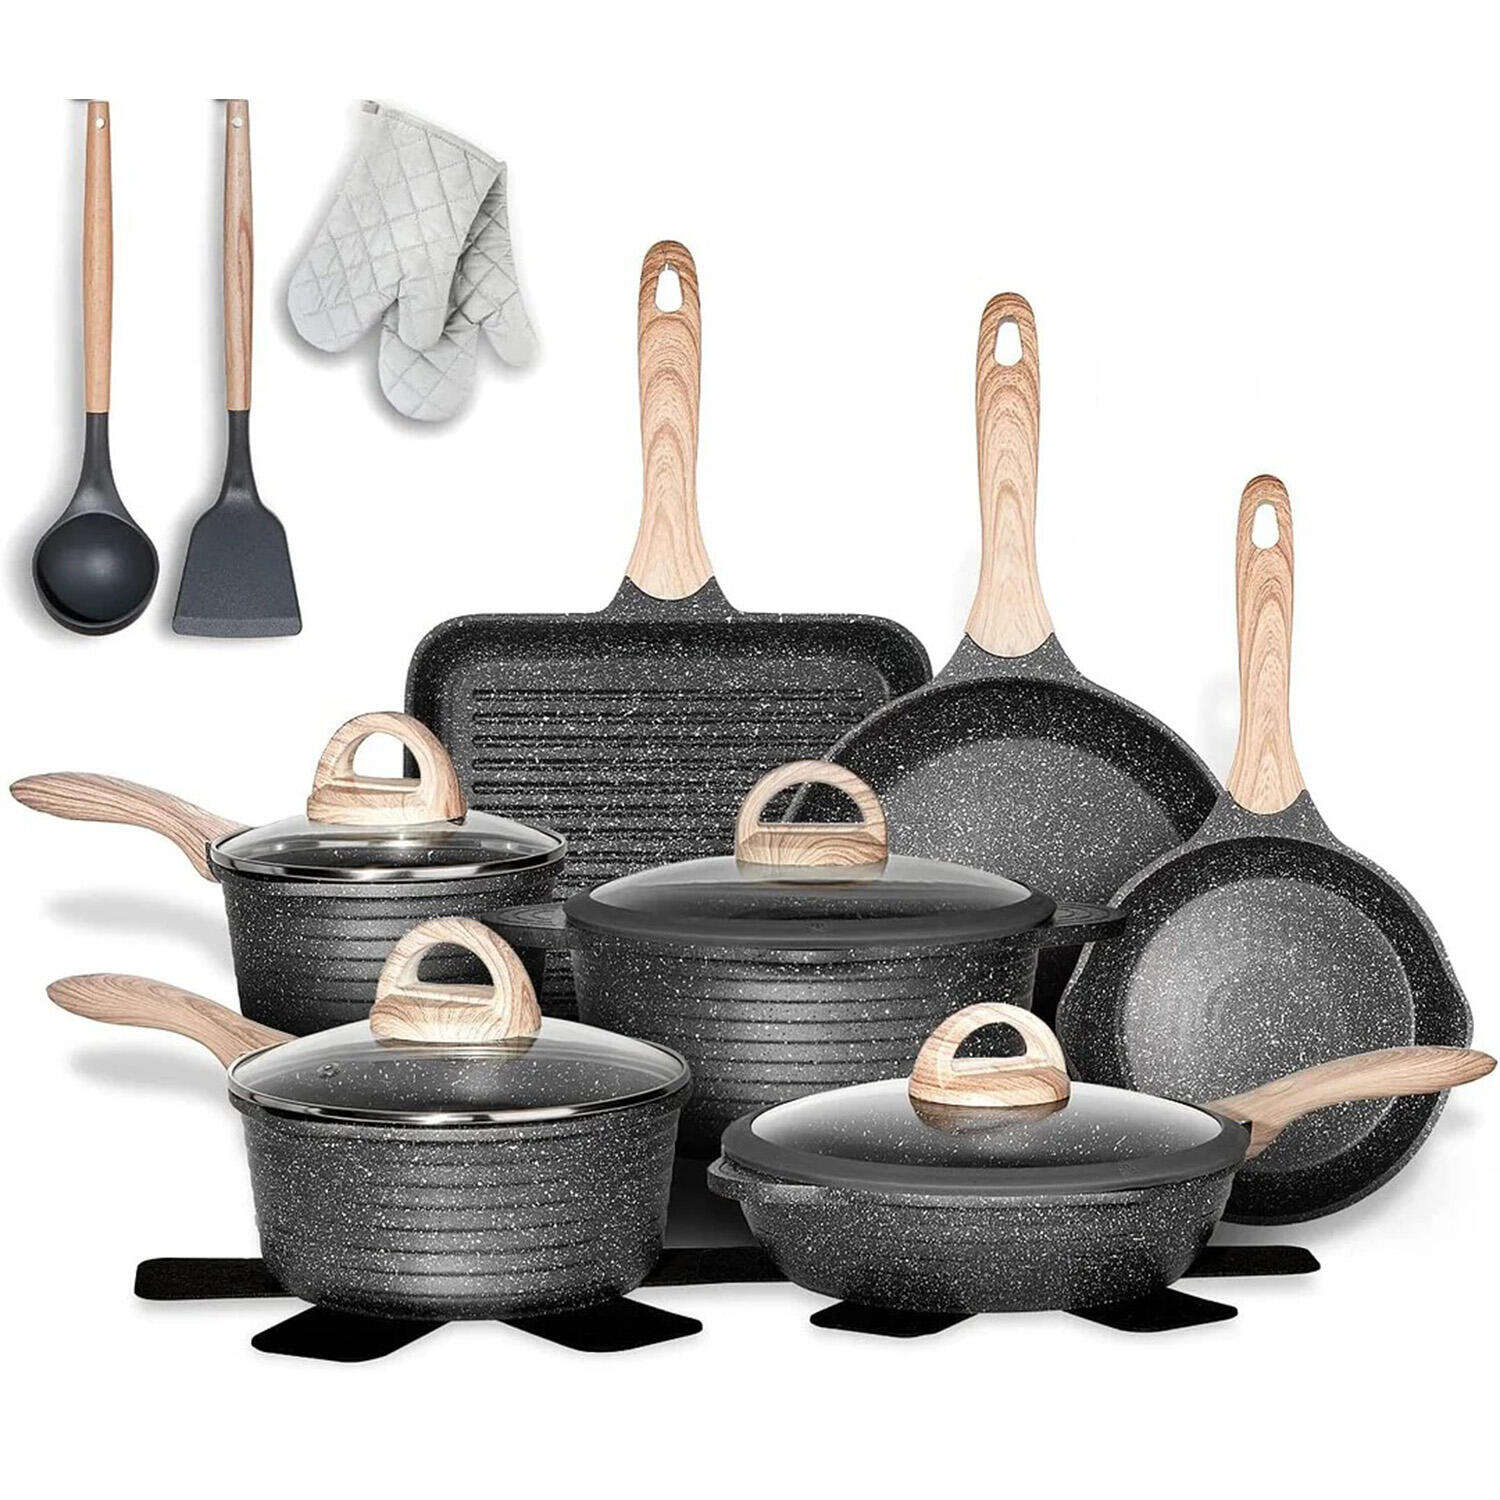 Limited-time Promotion. 117-piece Kitchen Spree. Meeting All The Needs Of The Kitchen